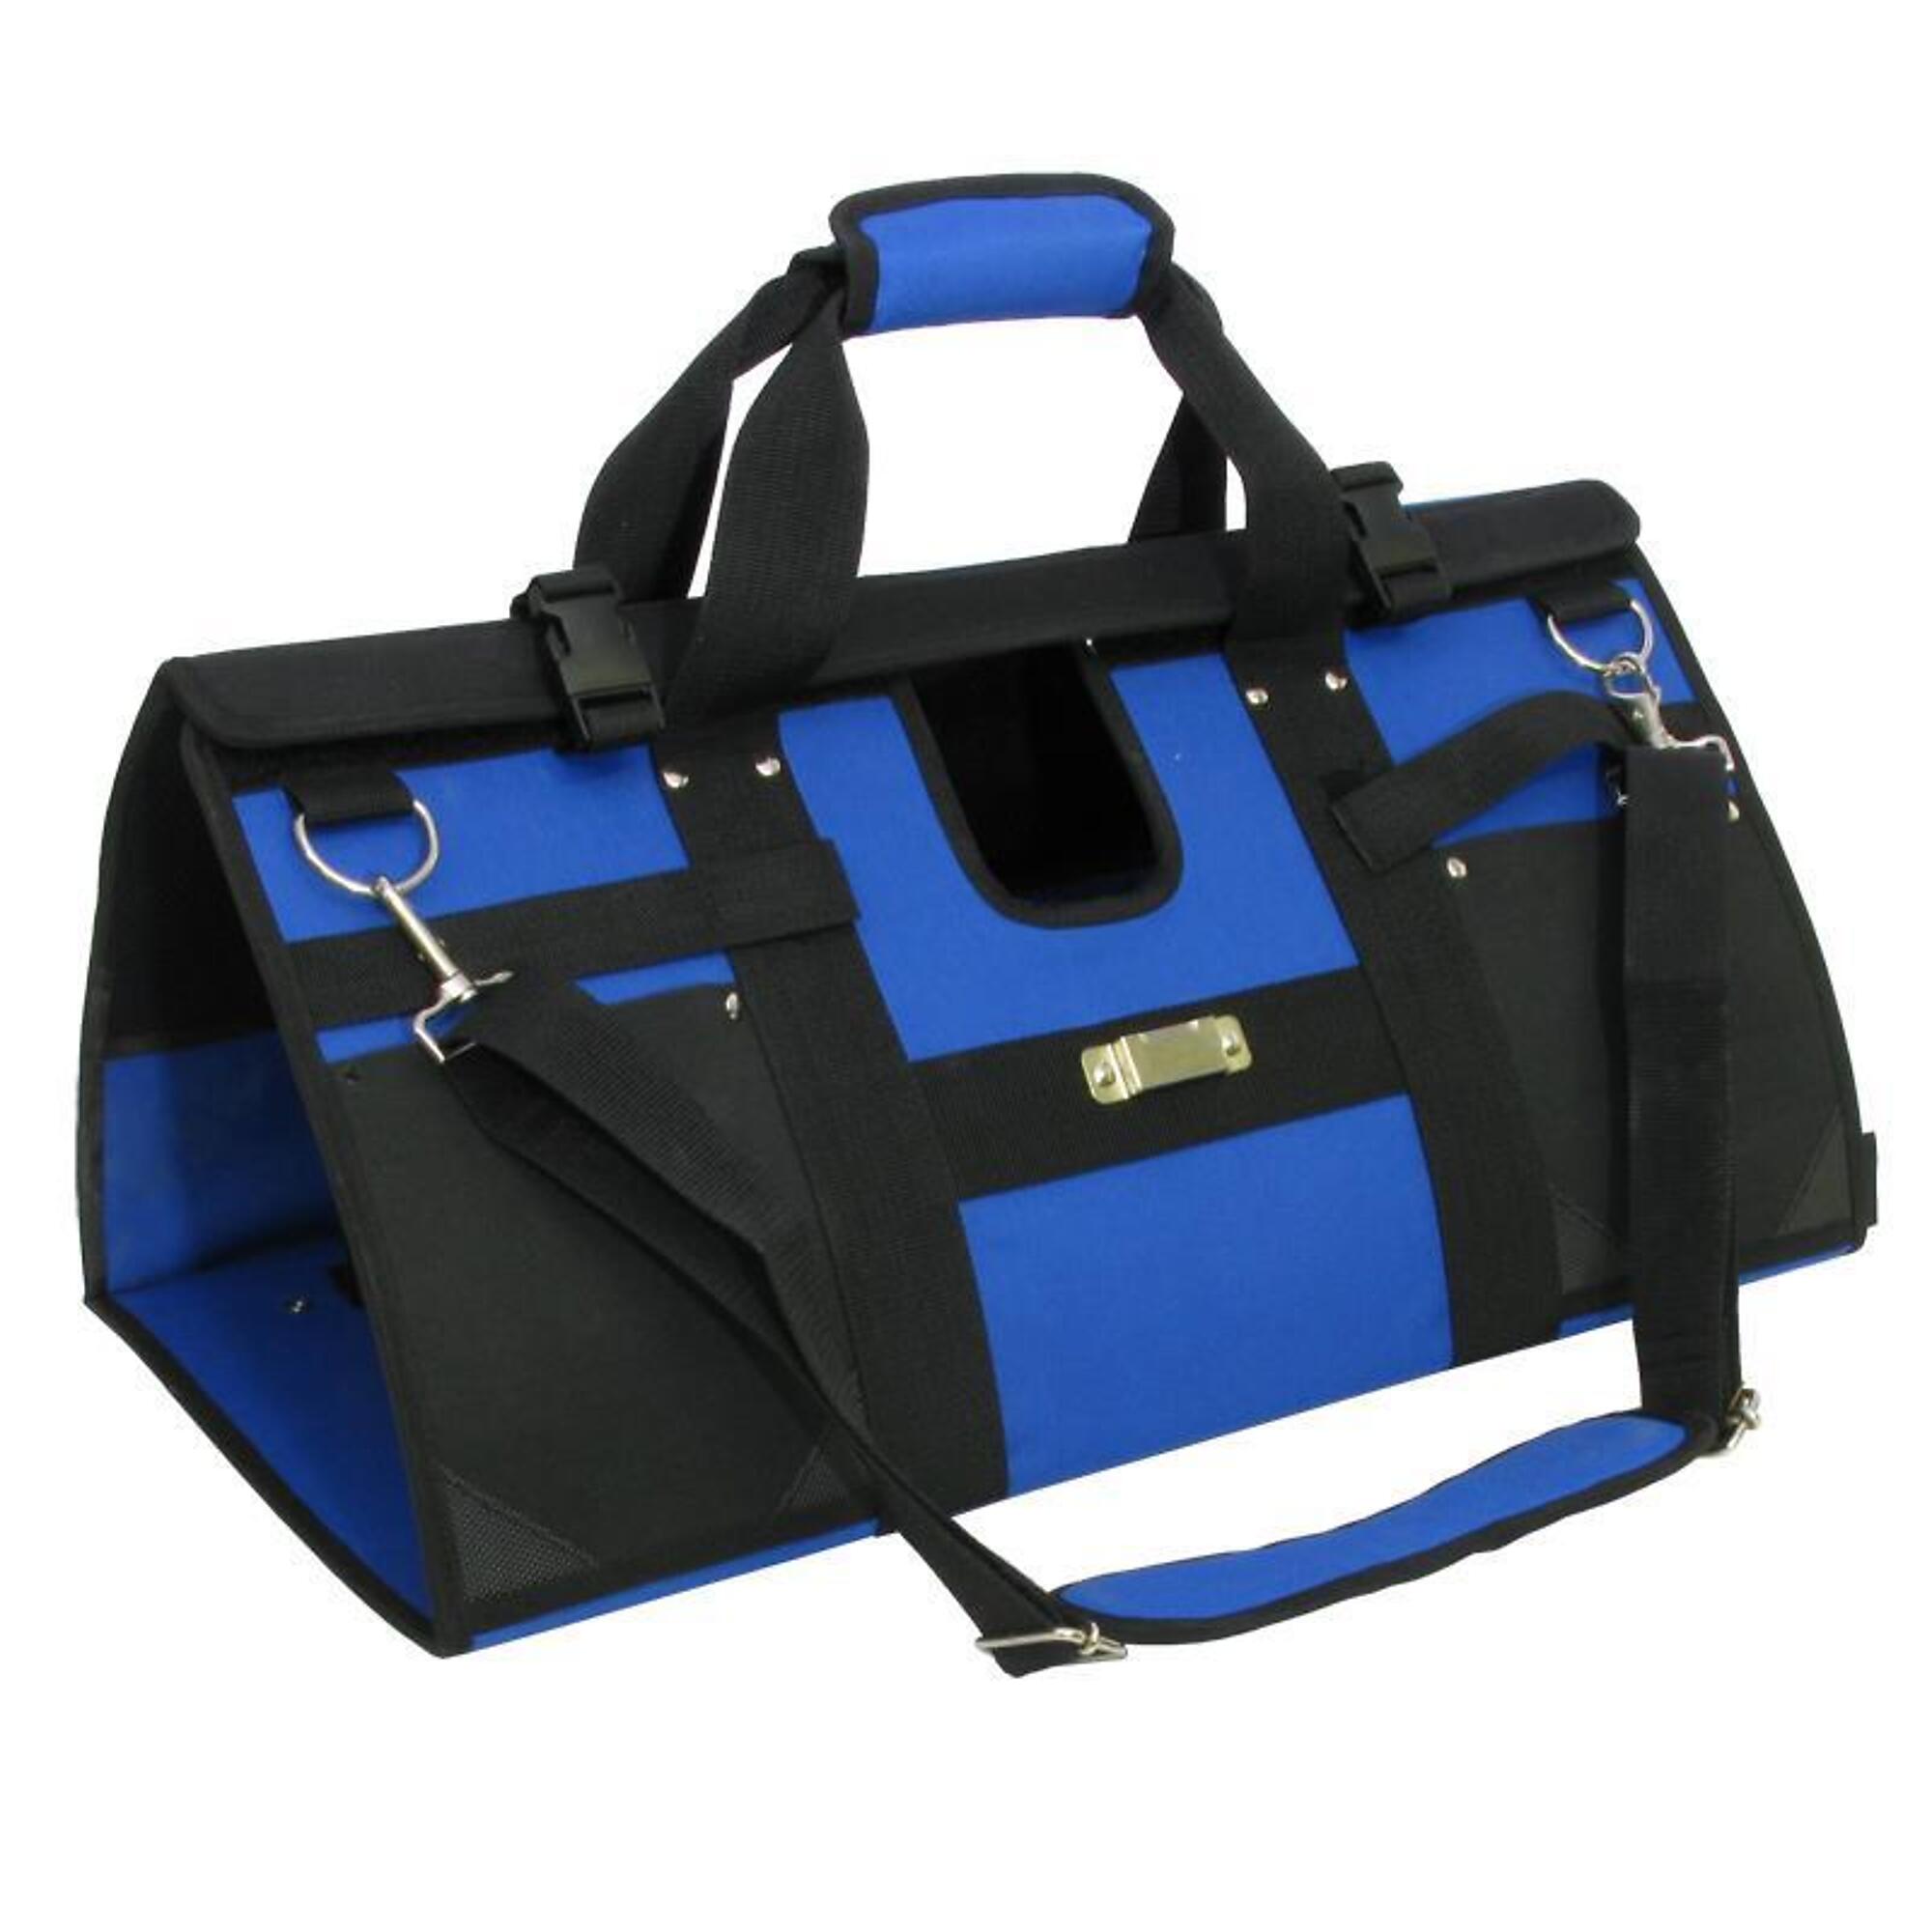 Marshalltown, Finisher's Tote, Color Blue, Pockets (qty.) 9 Material Nylon, Model TOTE